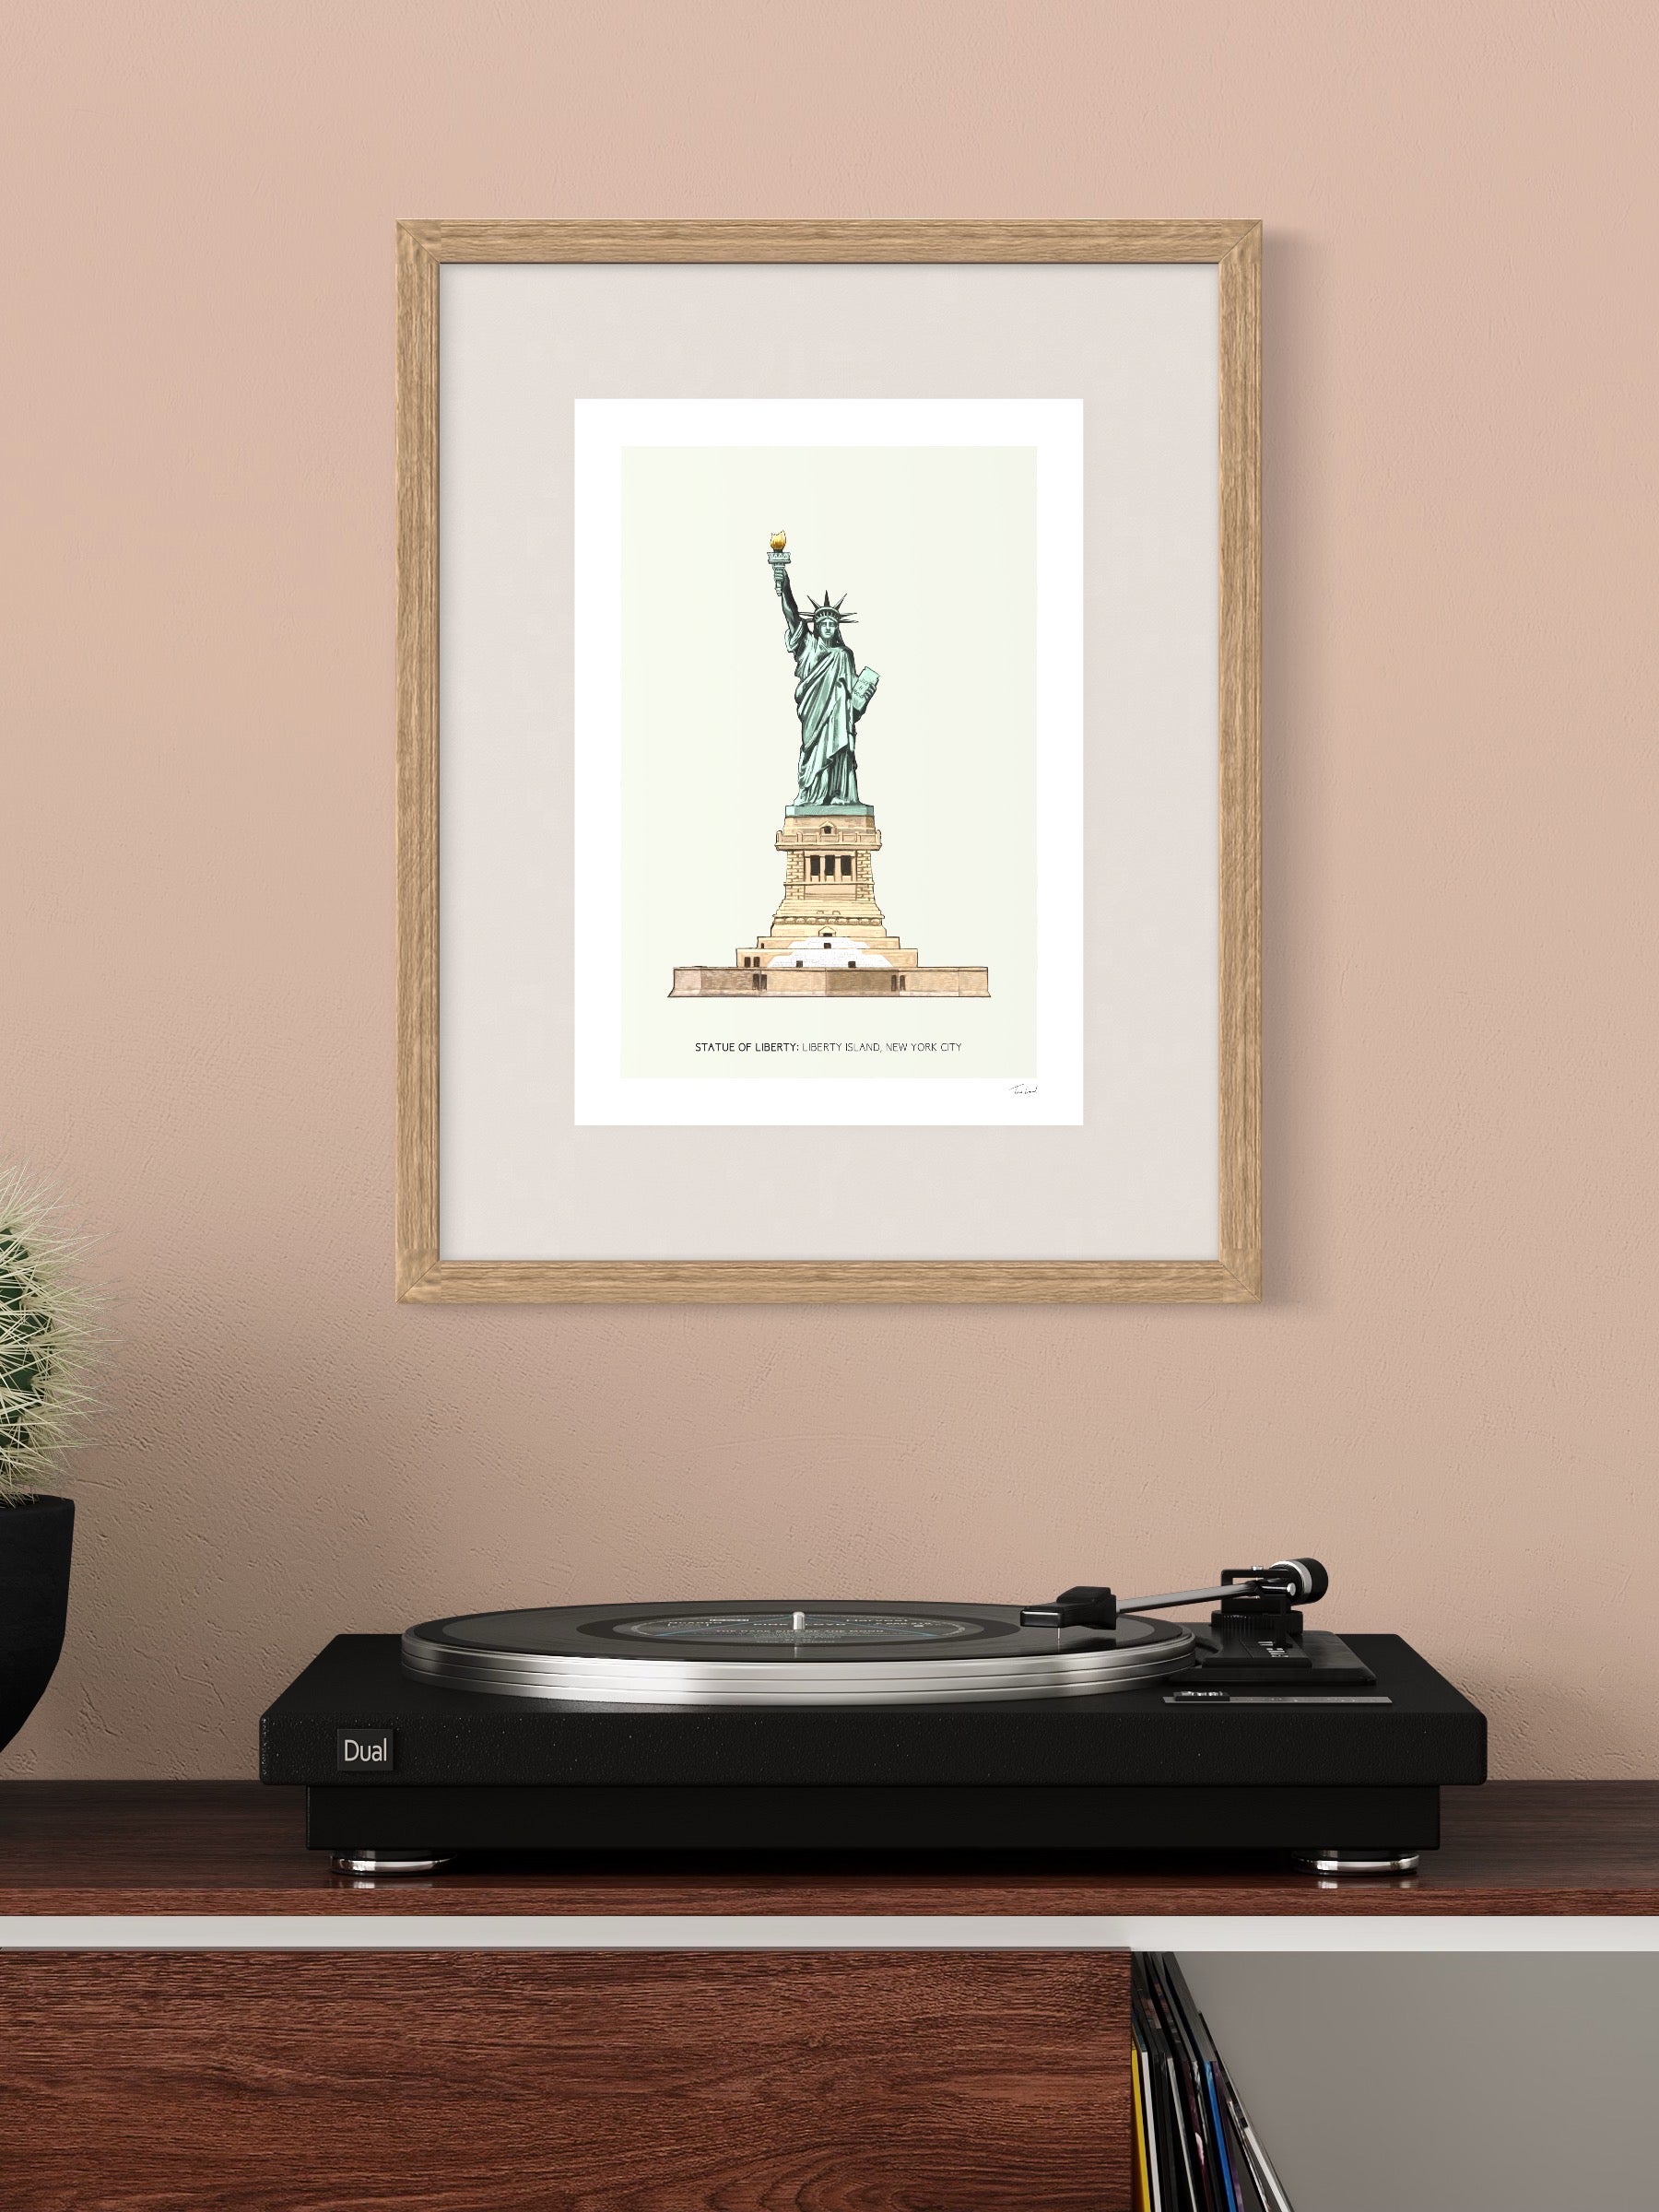 This image shows a giclee wall art print by Tom Laird Illustration of the world-famous New York City landmark the Statue of Liberty, framed in a beautiful living room with tasteful modern home decor. This art print is available from Tom Laird Illustration in A4 size.